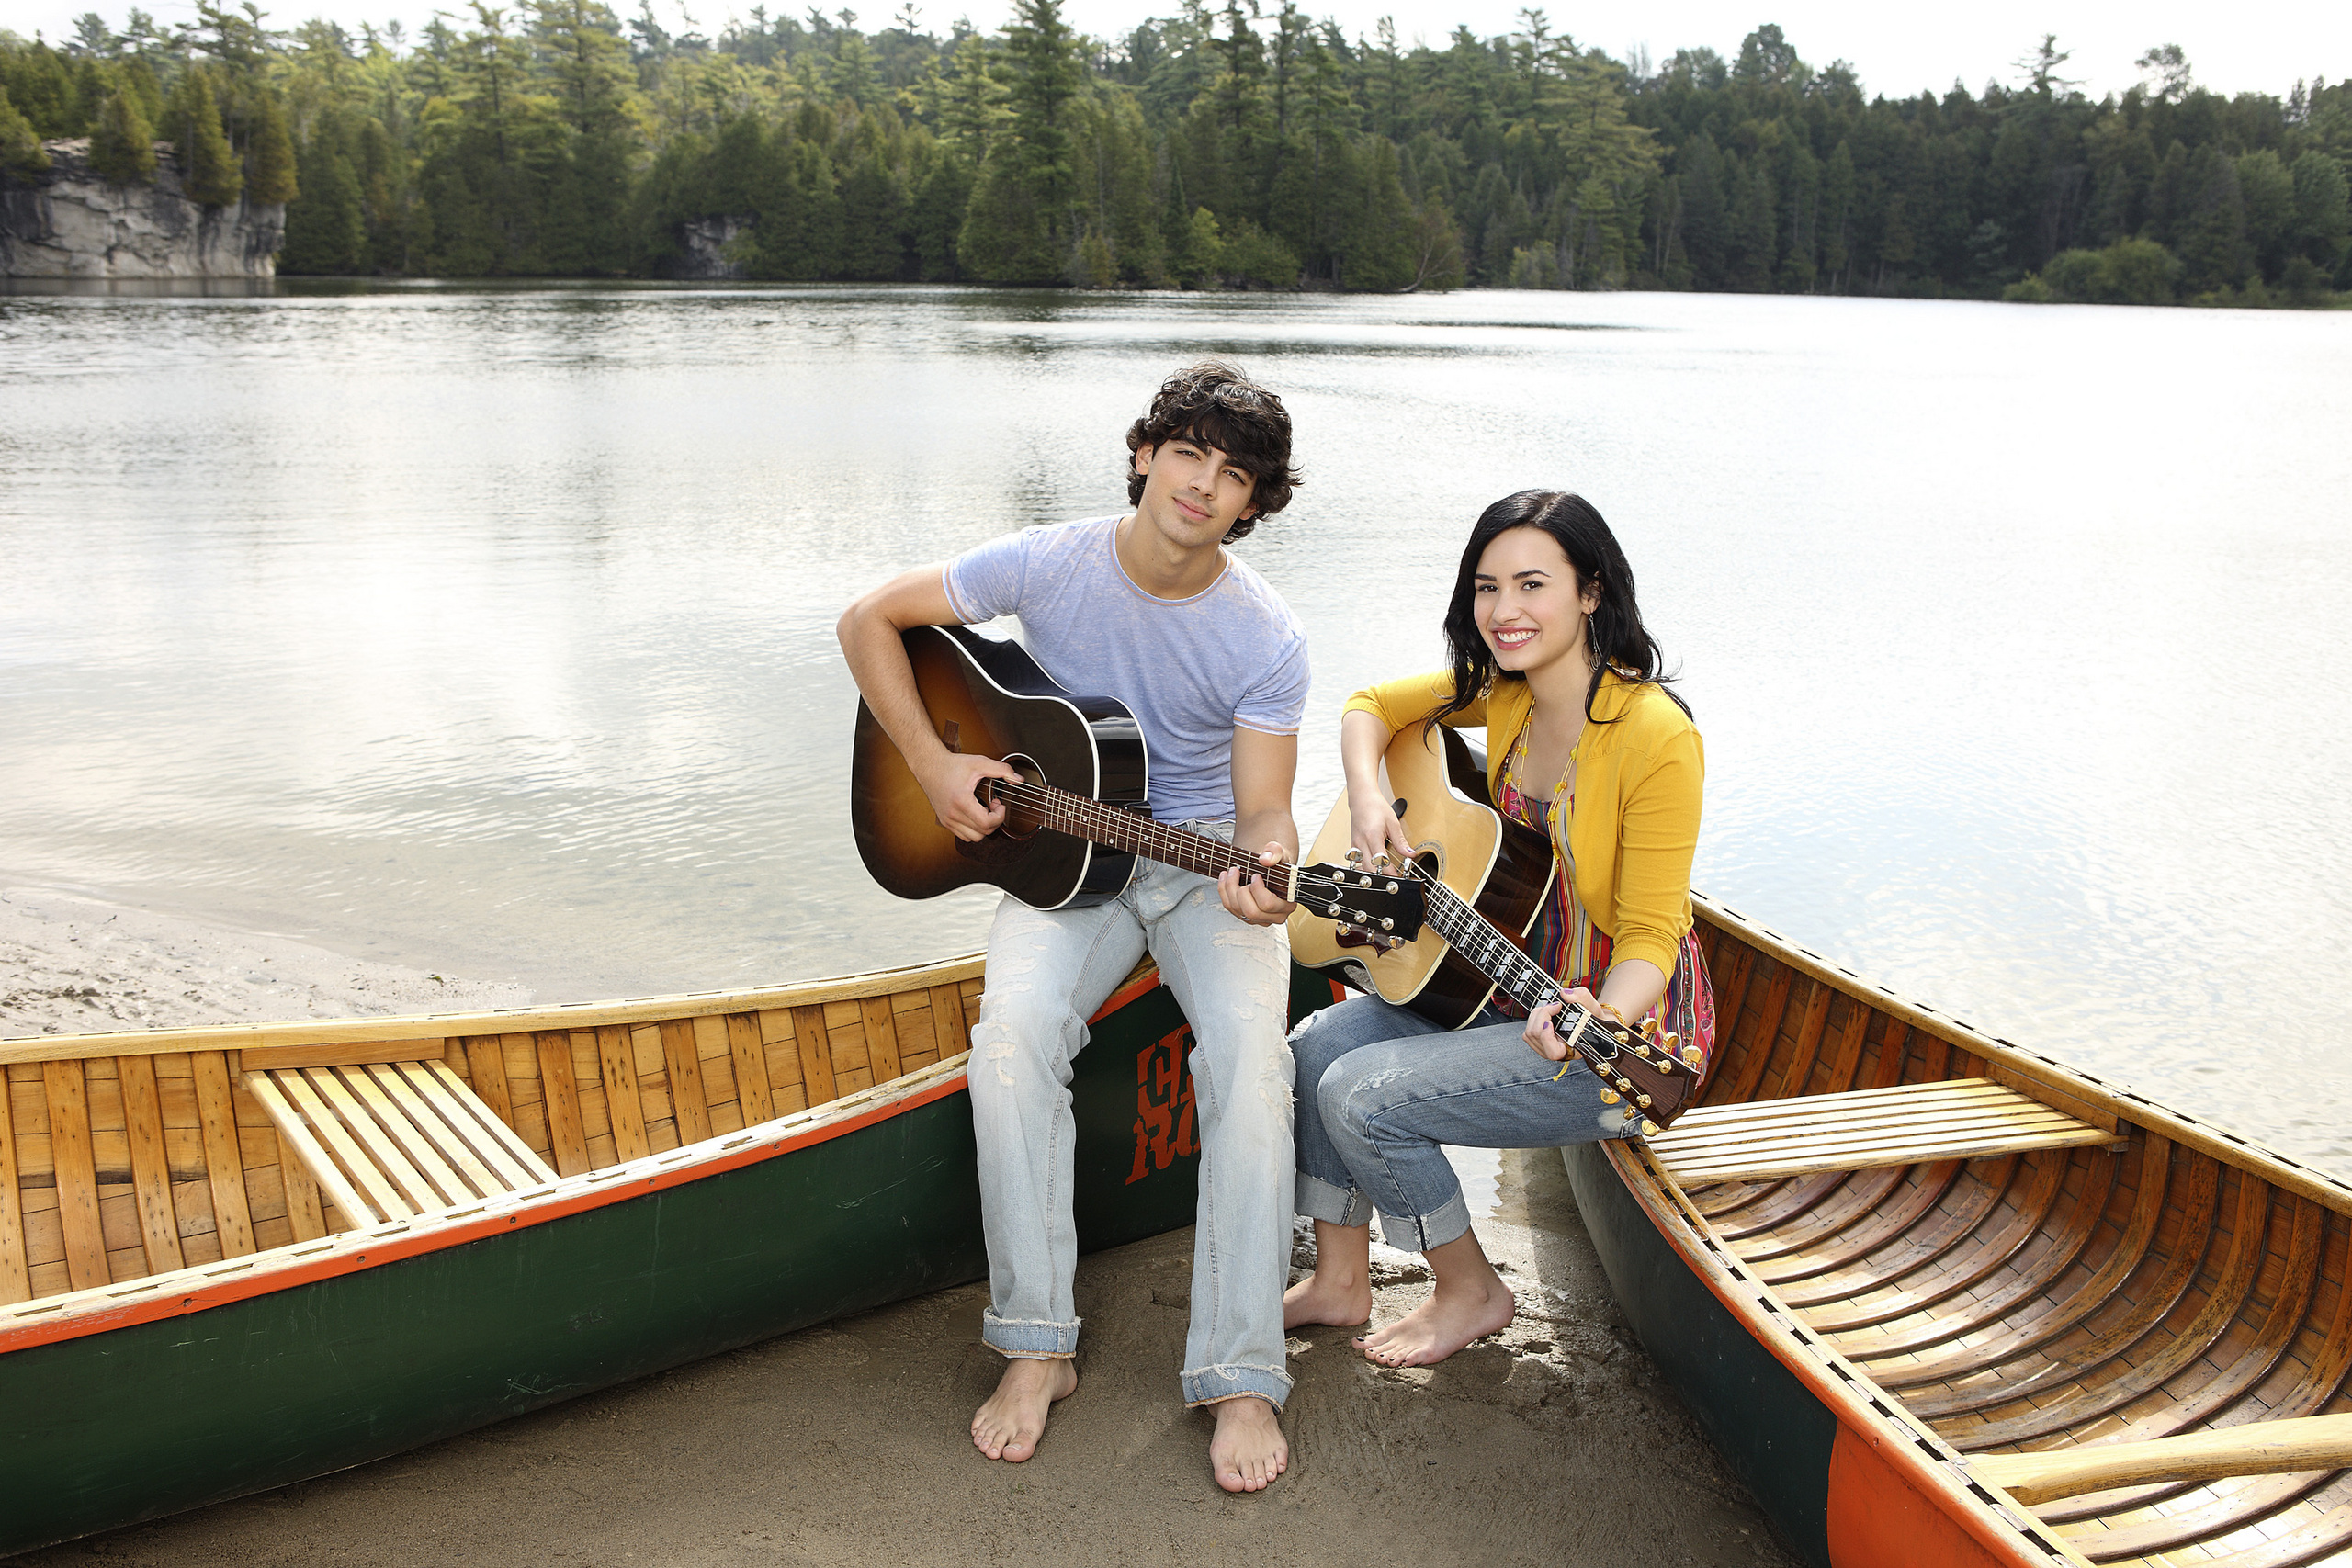 Shane and Mitchie - Camp Rock 2 - Disney Channel